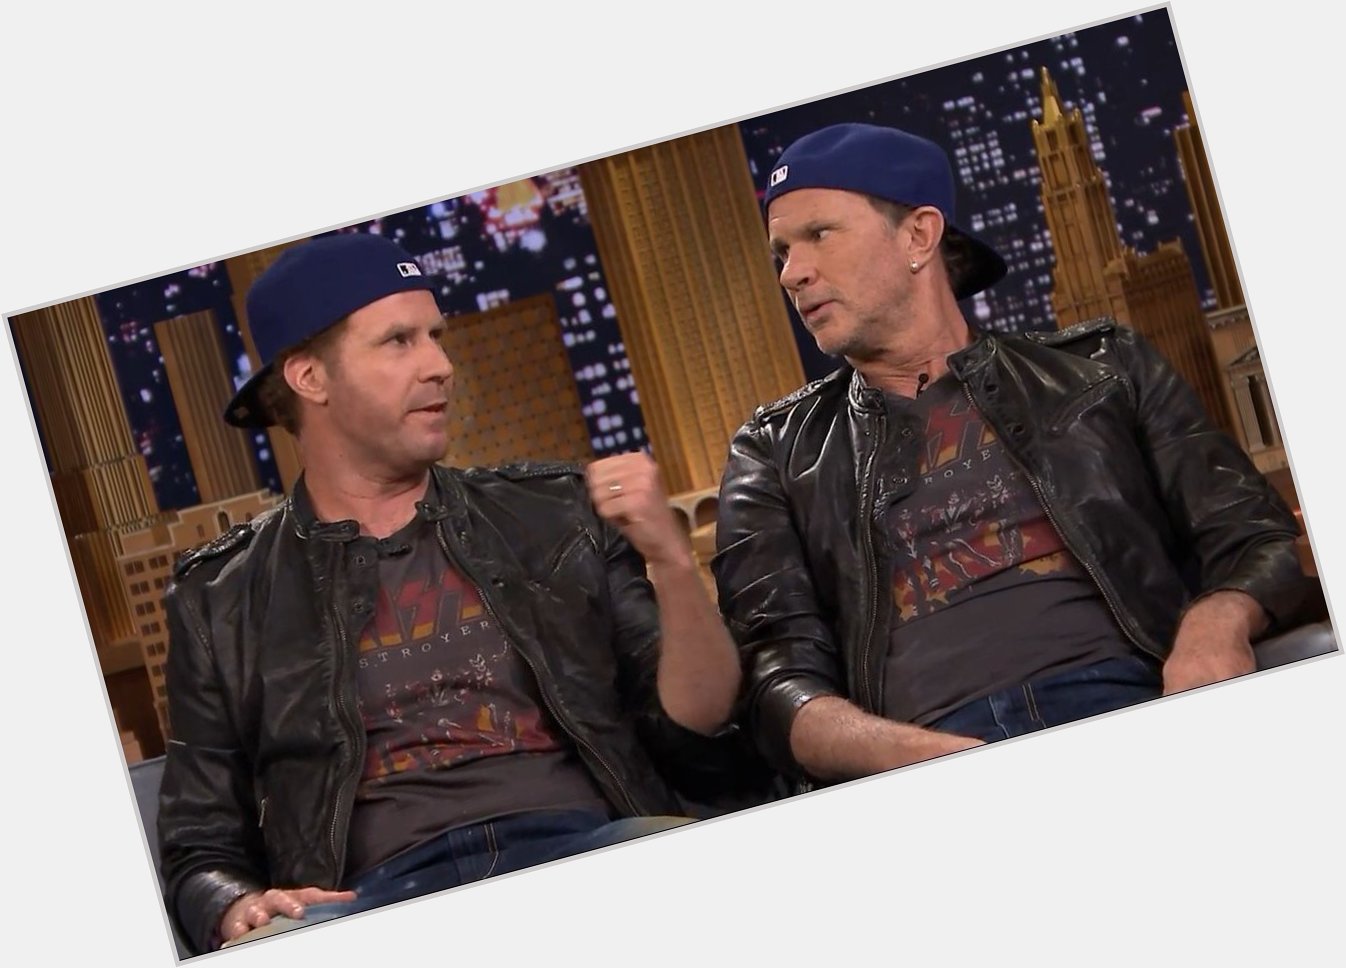 Happy Birthday Will Ferrell of CHICKENFOOT and RED HOT CHILI PEPPERS!
Err..wait.
Chad Smith. We meant Chad Smith. 